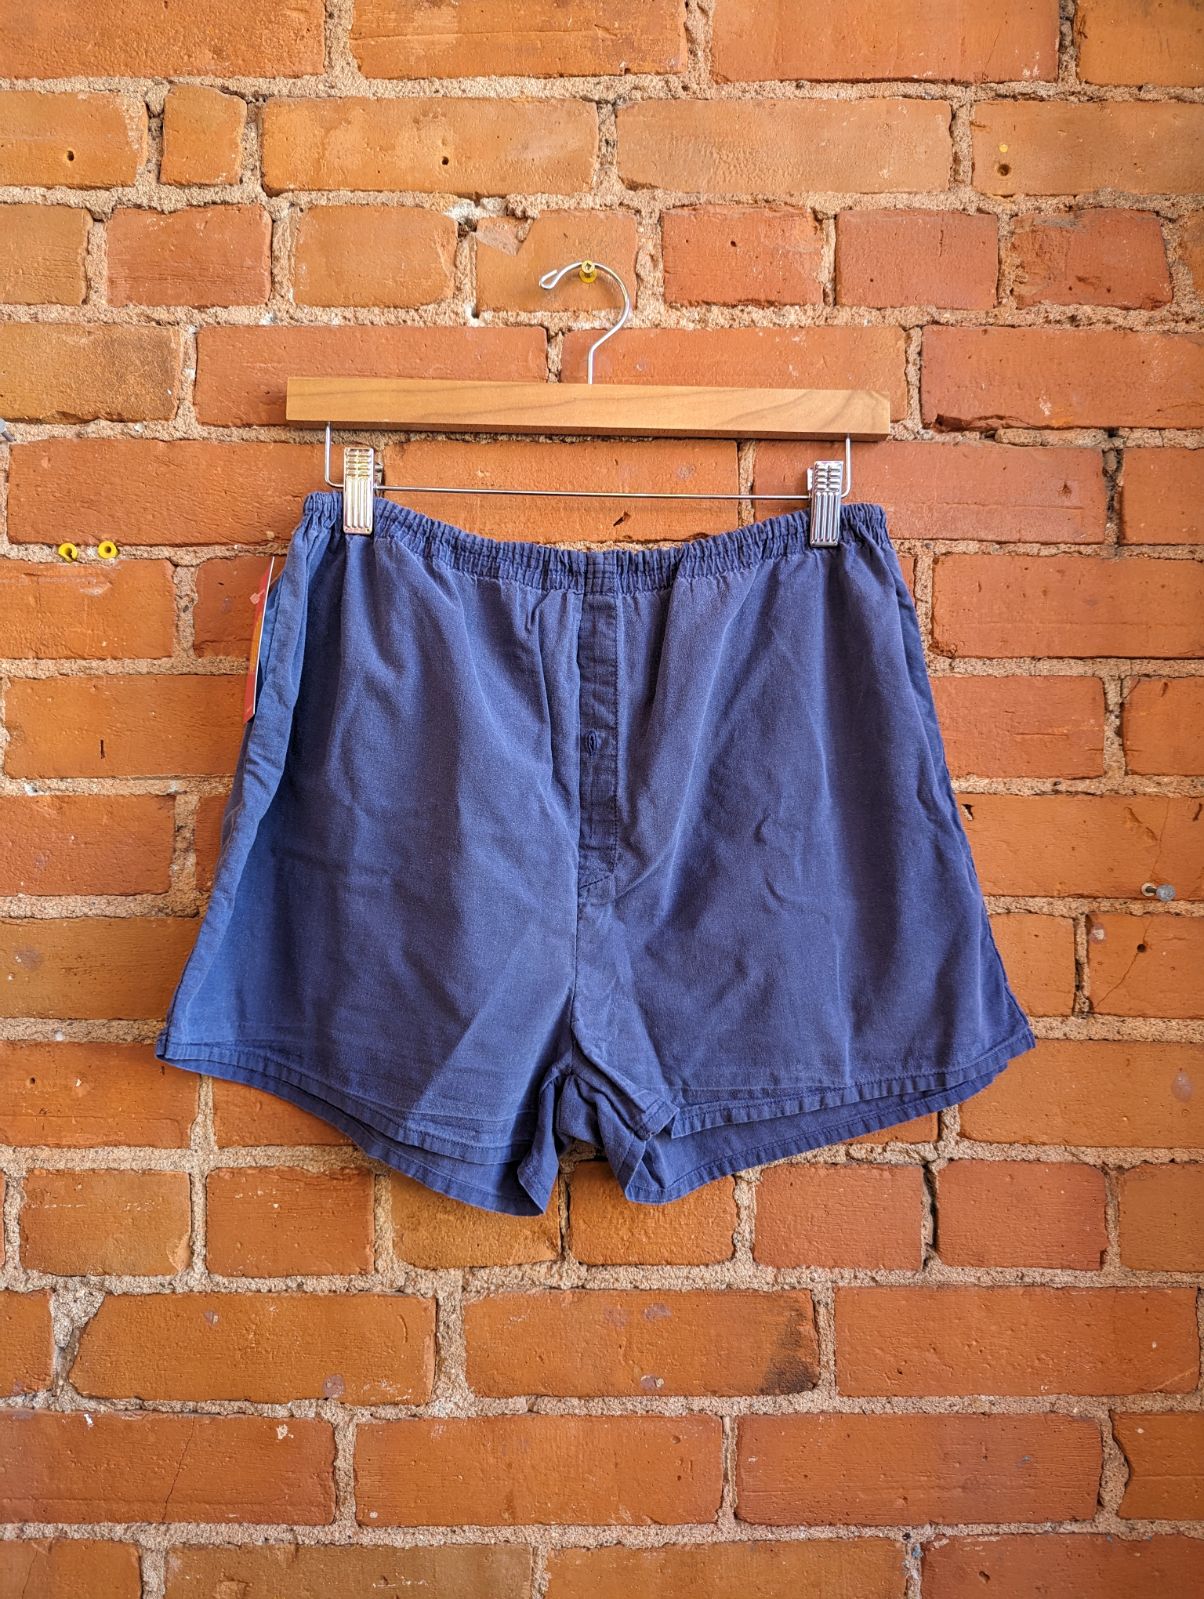 1950s or 60s Steel Blue Boxer Style Shorts